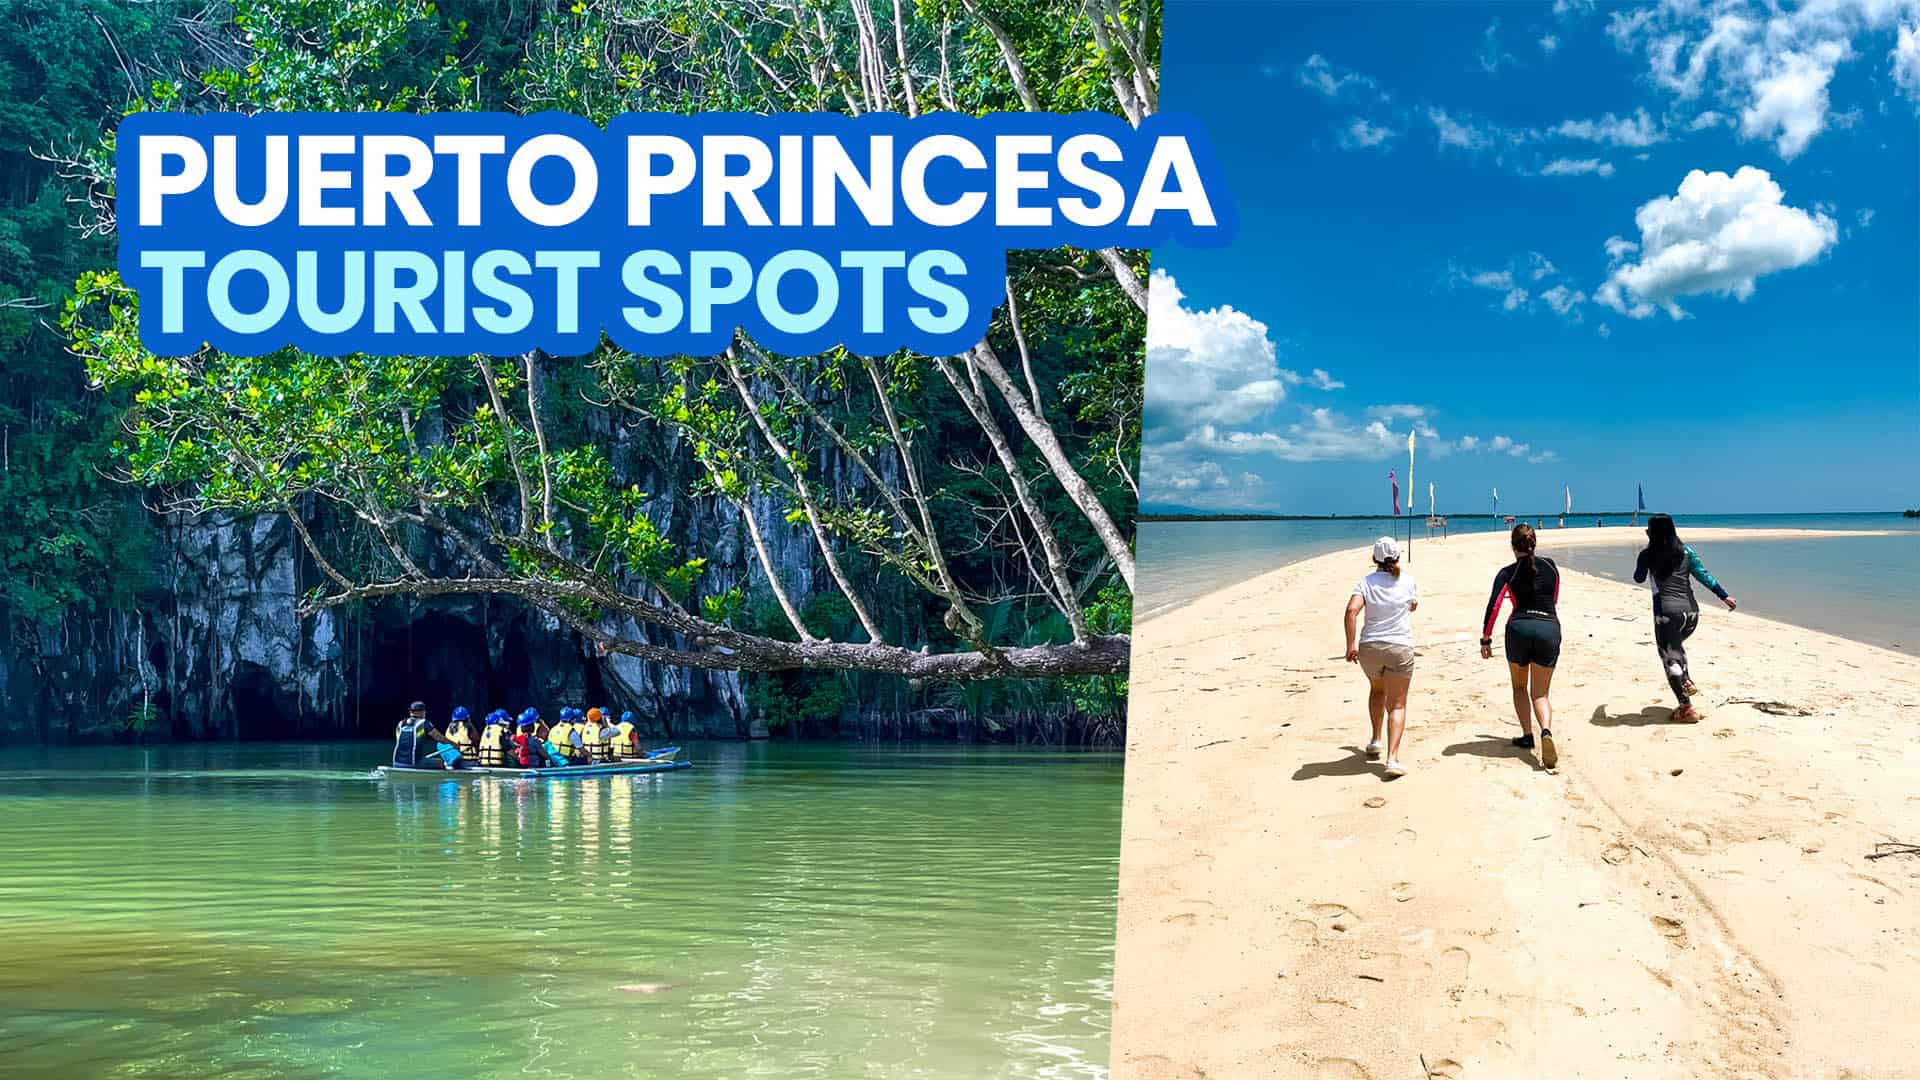 Top 25 PUERTO PRINCESA Tourist Spots to Visit & Things to Do